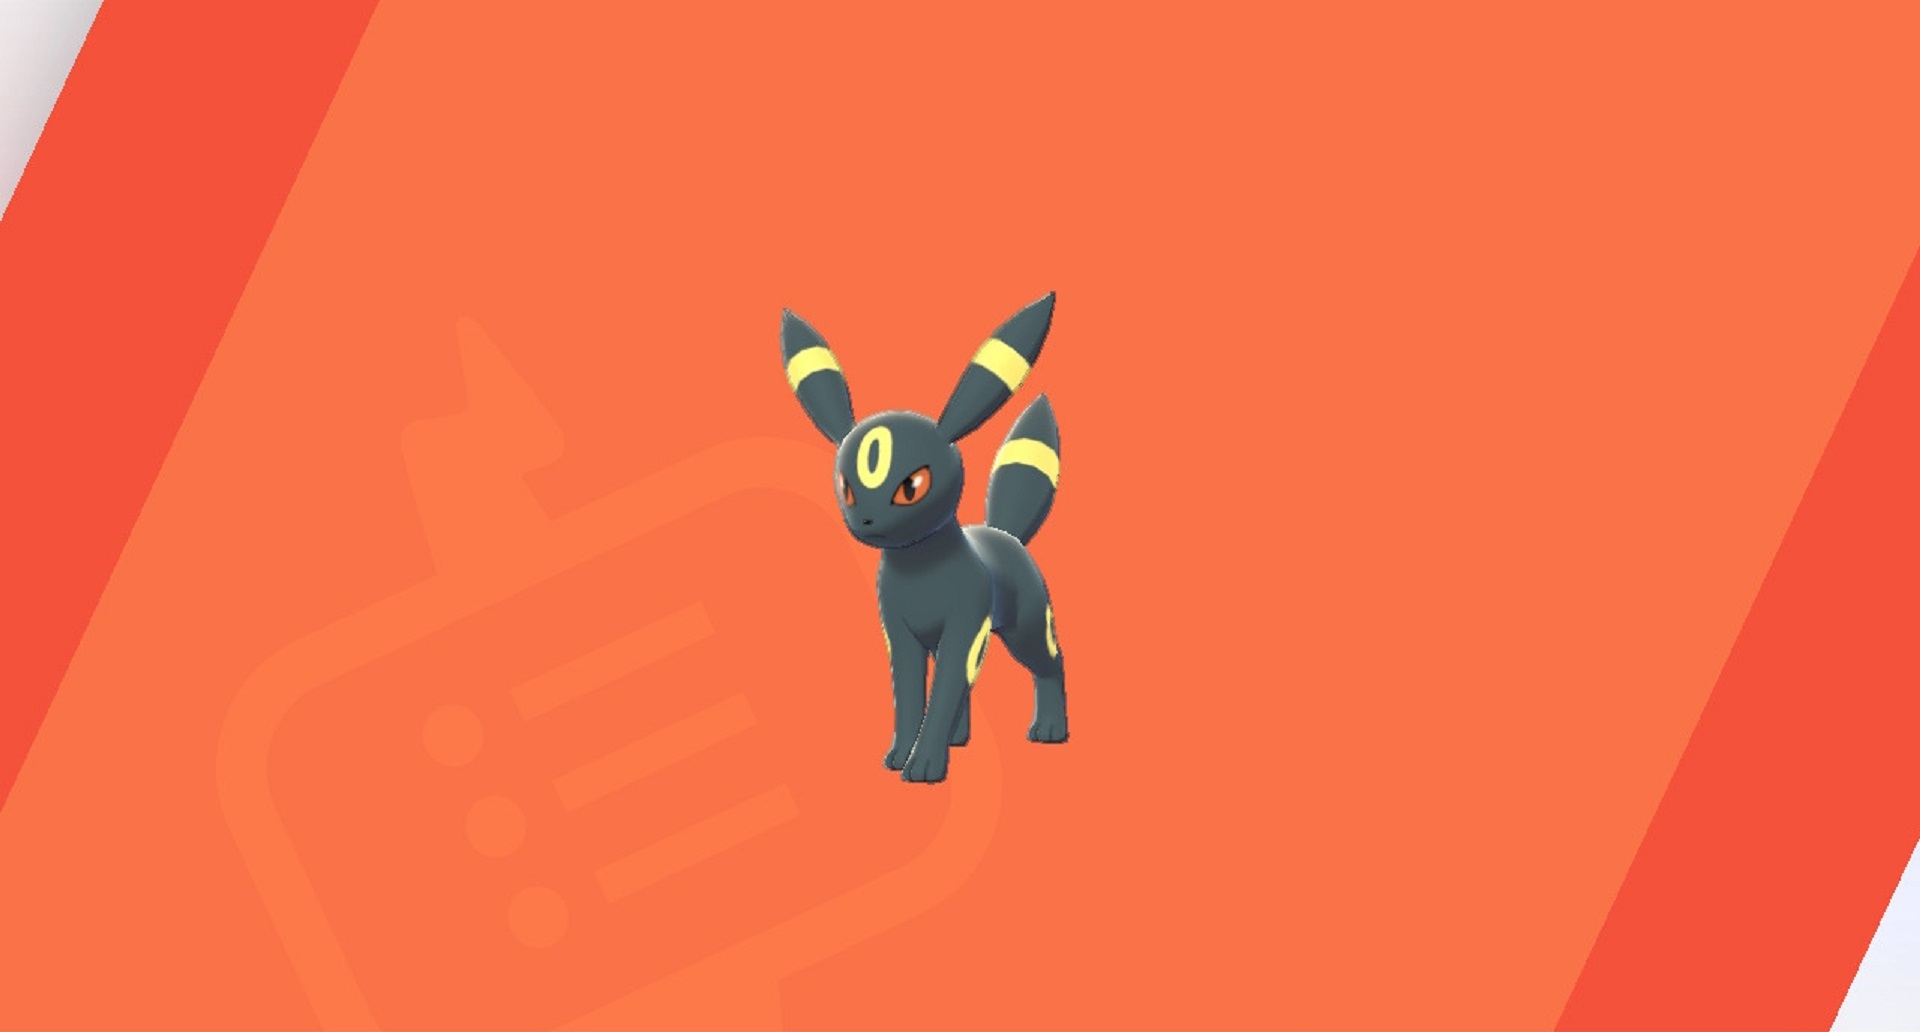 Pokémon Eevee evolutions: Umbreon against a red background.